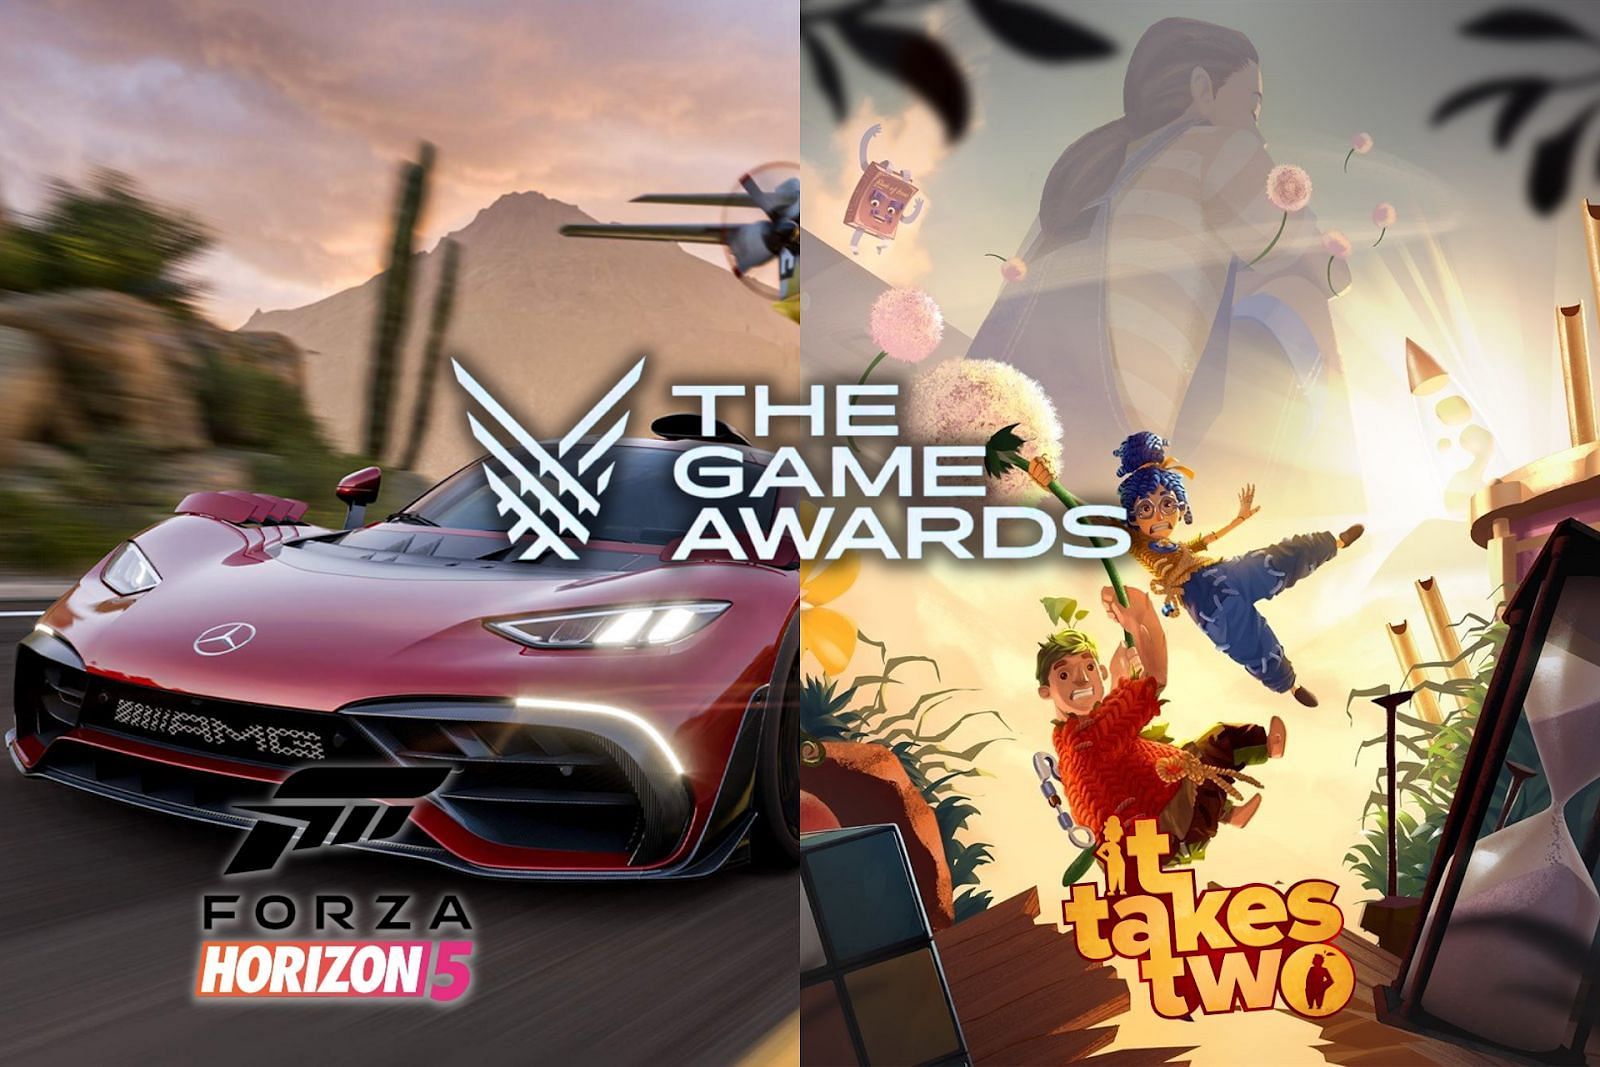 Forza Horizon 5 and It Takes Two win most awards at The Game Awards 2021 - Sportskeeda